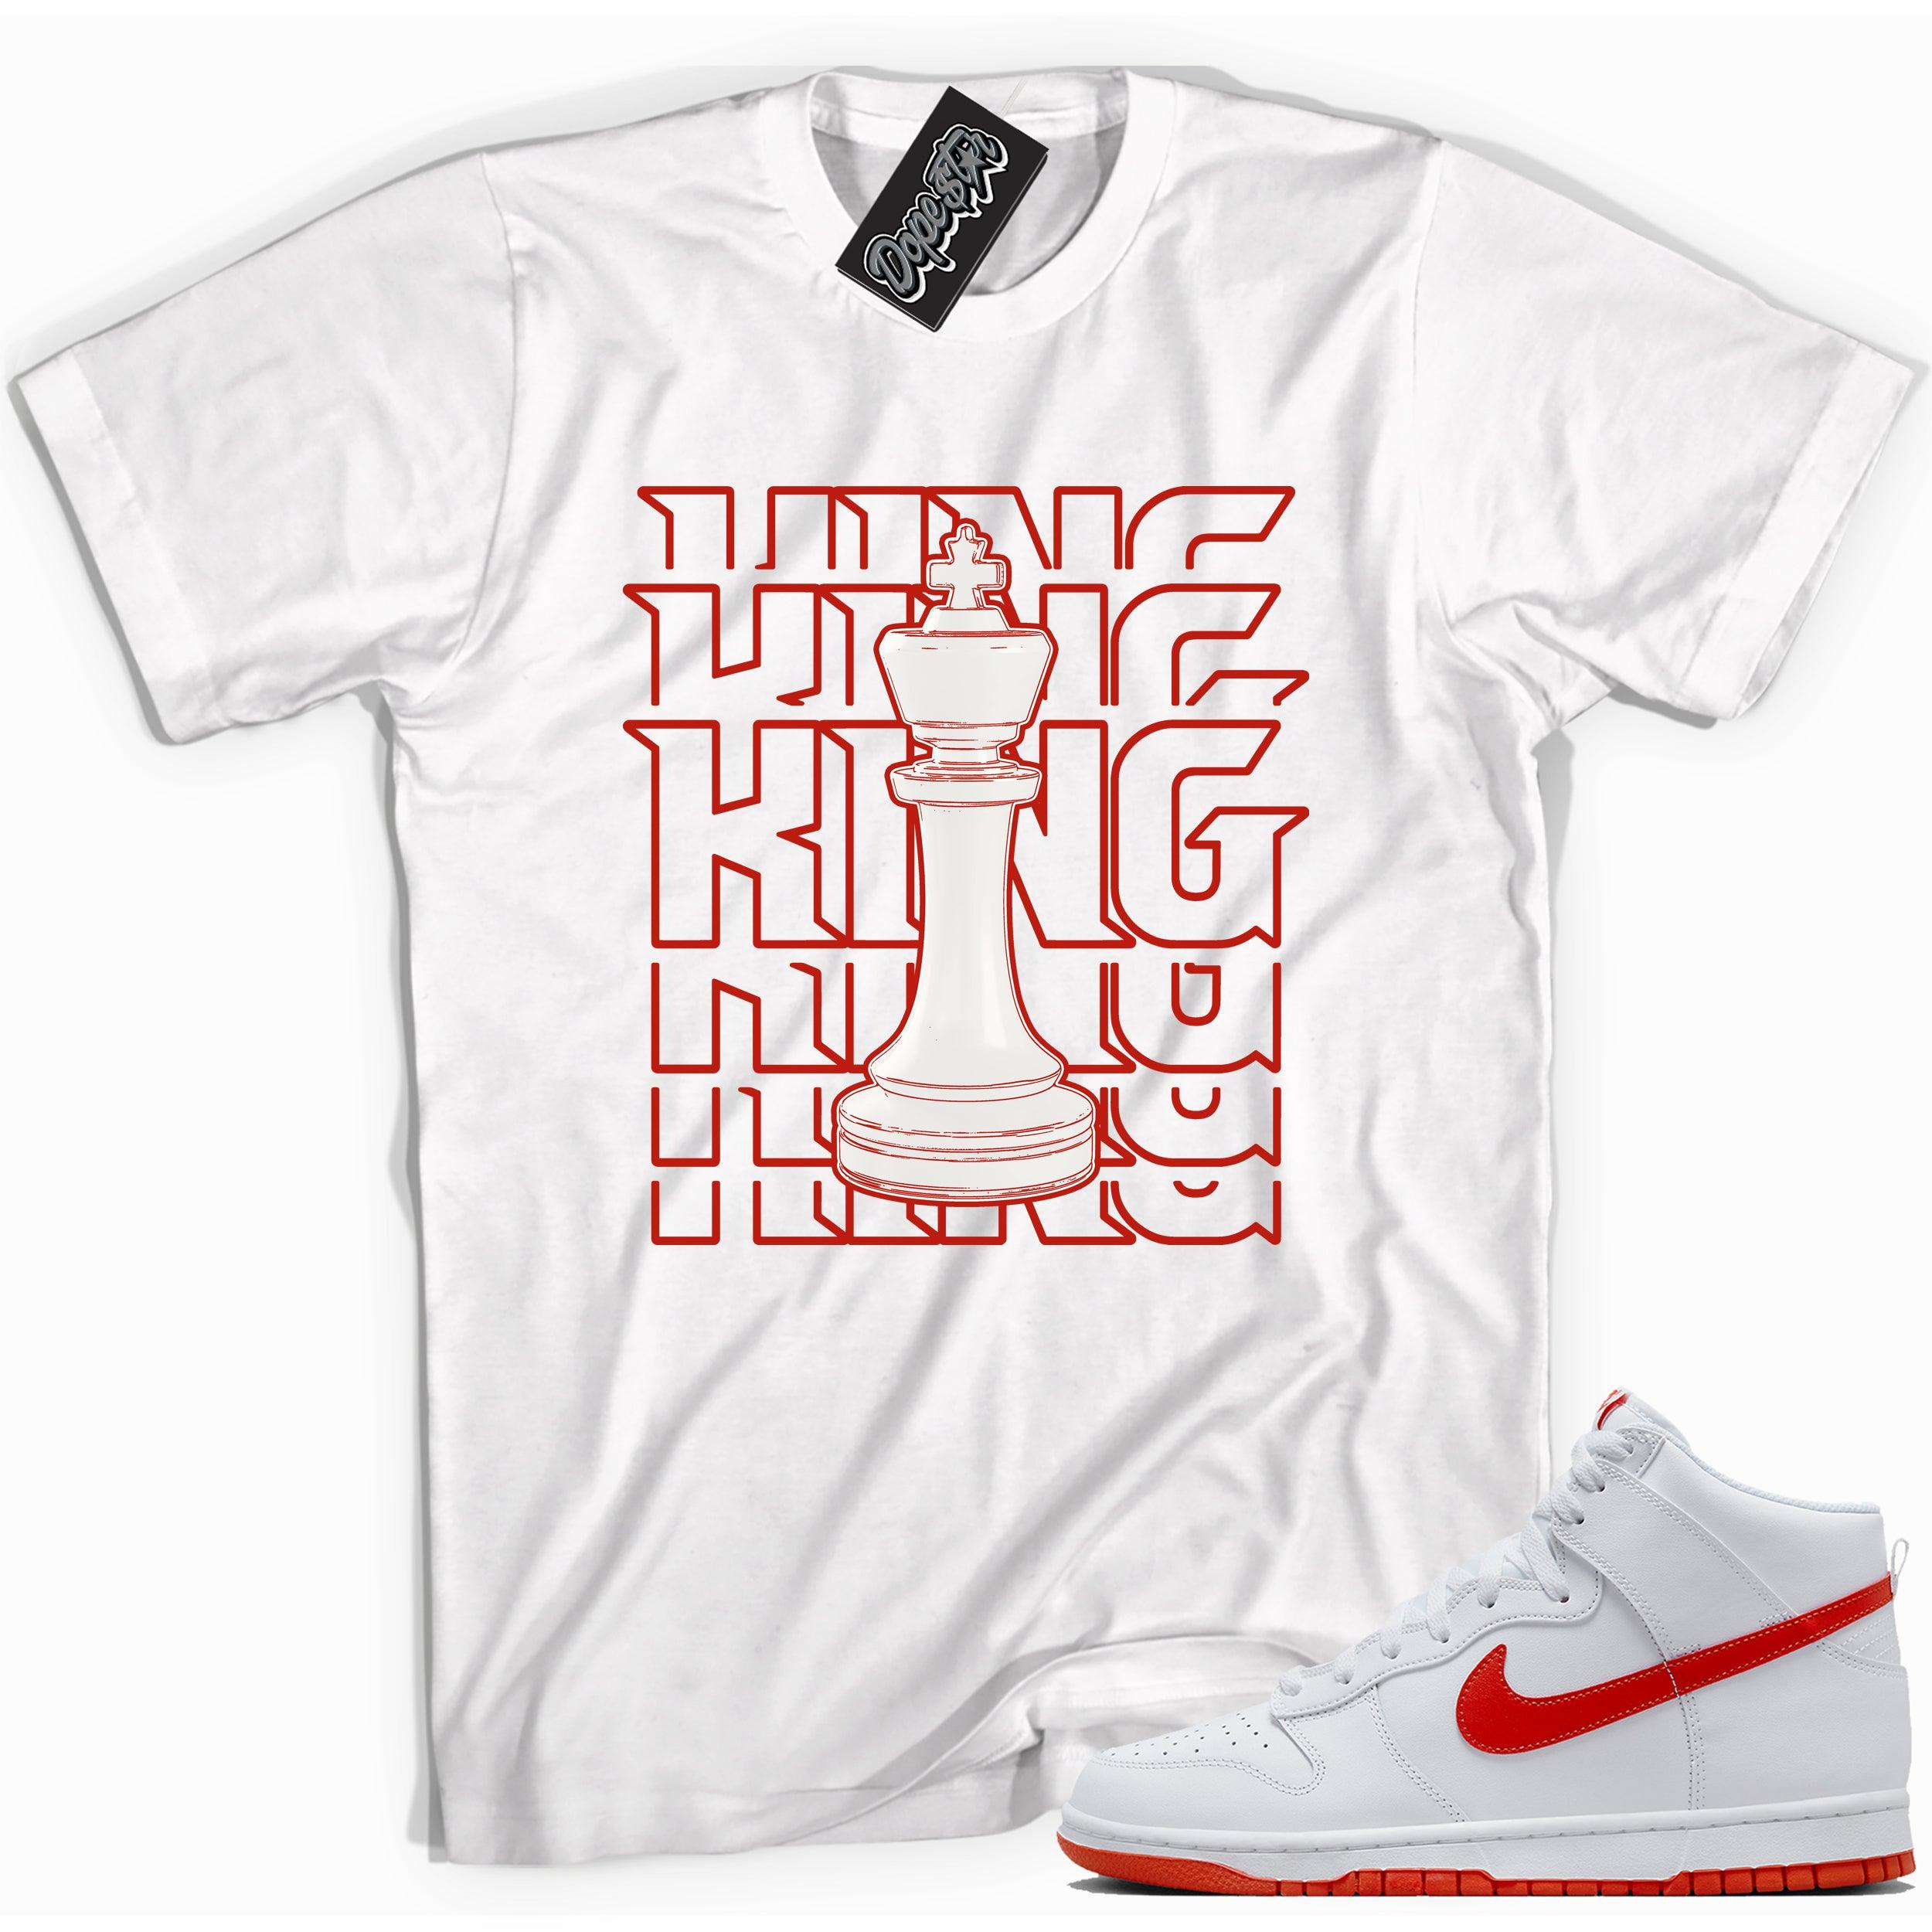 Cool white graphic tee with 'King' print, that perfectly matches Nike Dunk High White Picante Red sneakers.